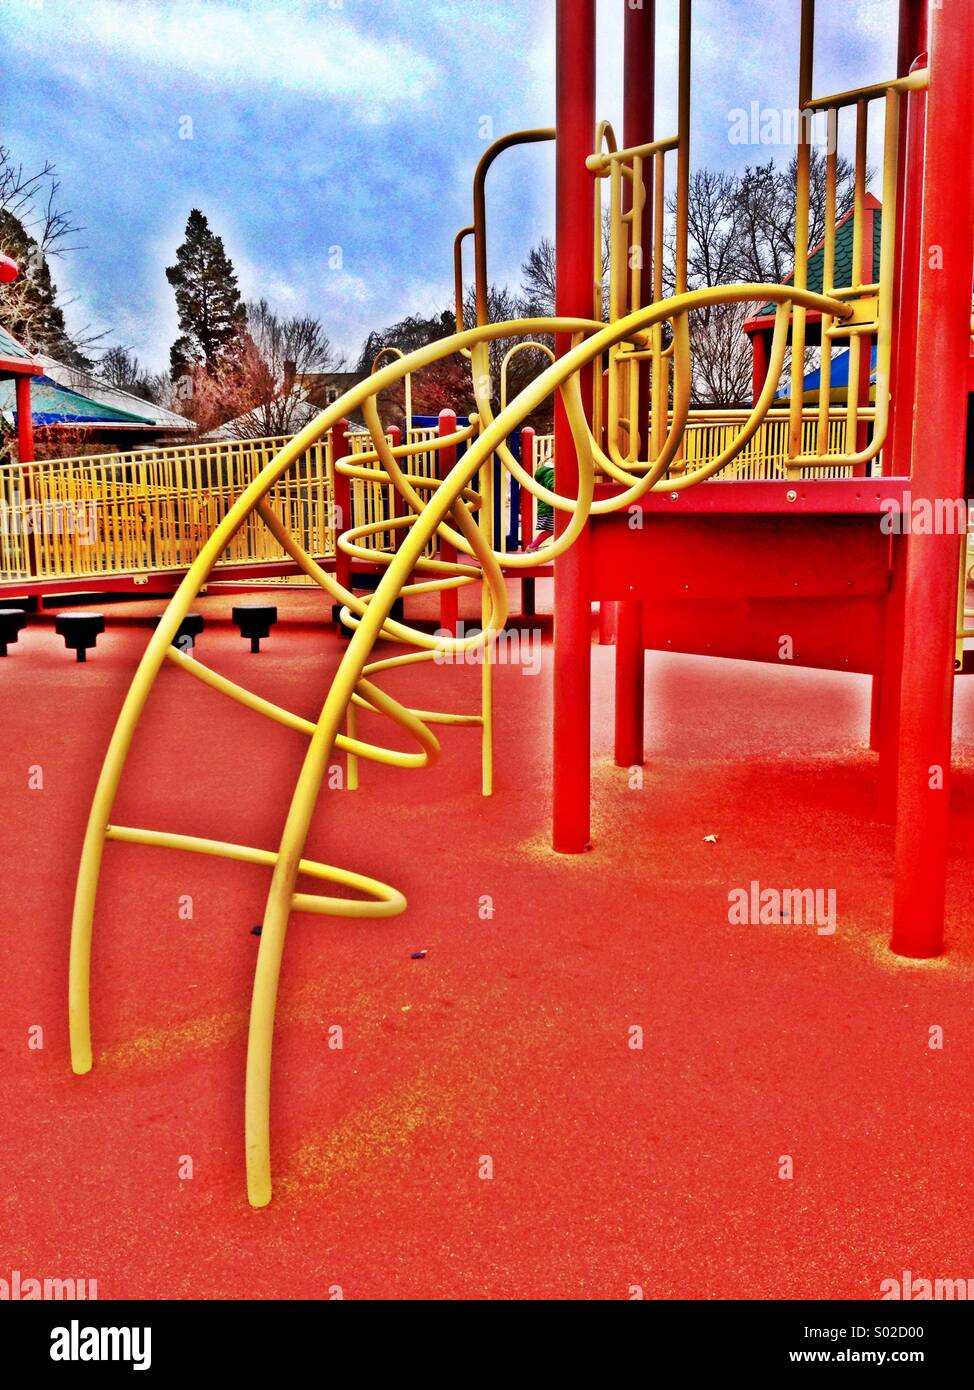 A highly stylized image of playground equipment at a suburban park. Stock Photo